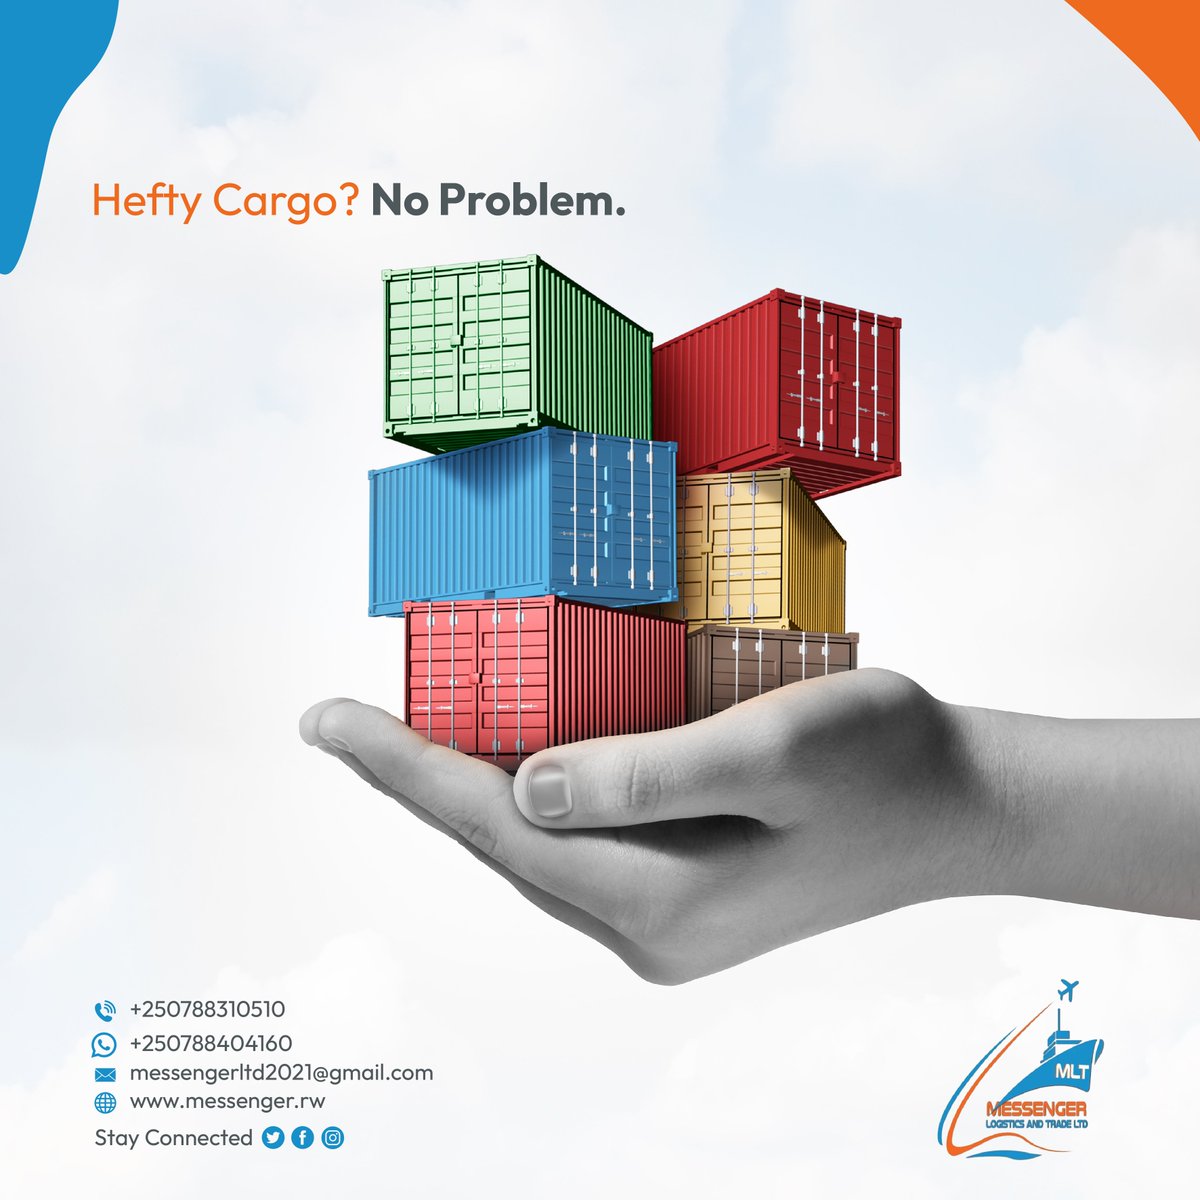 You rest assured, we handle your cargo no matter how bulky, big, or exceptional it might be.

Visit our website to learn more.

#MessengerLogisticsAndTrade #projectcargo #ImportAndExport